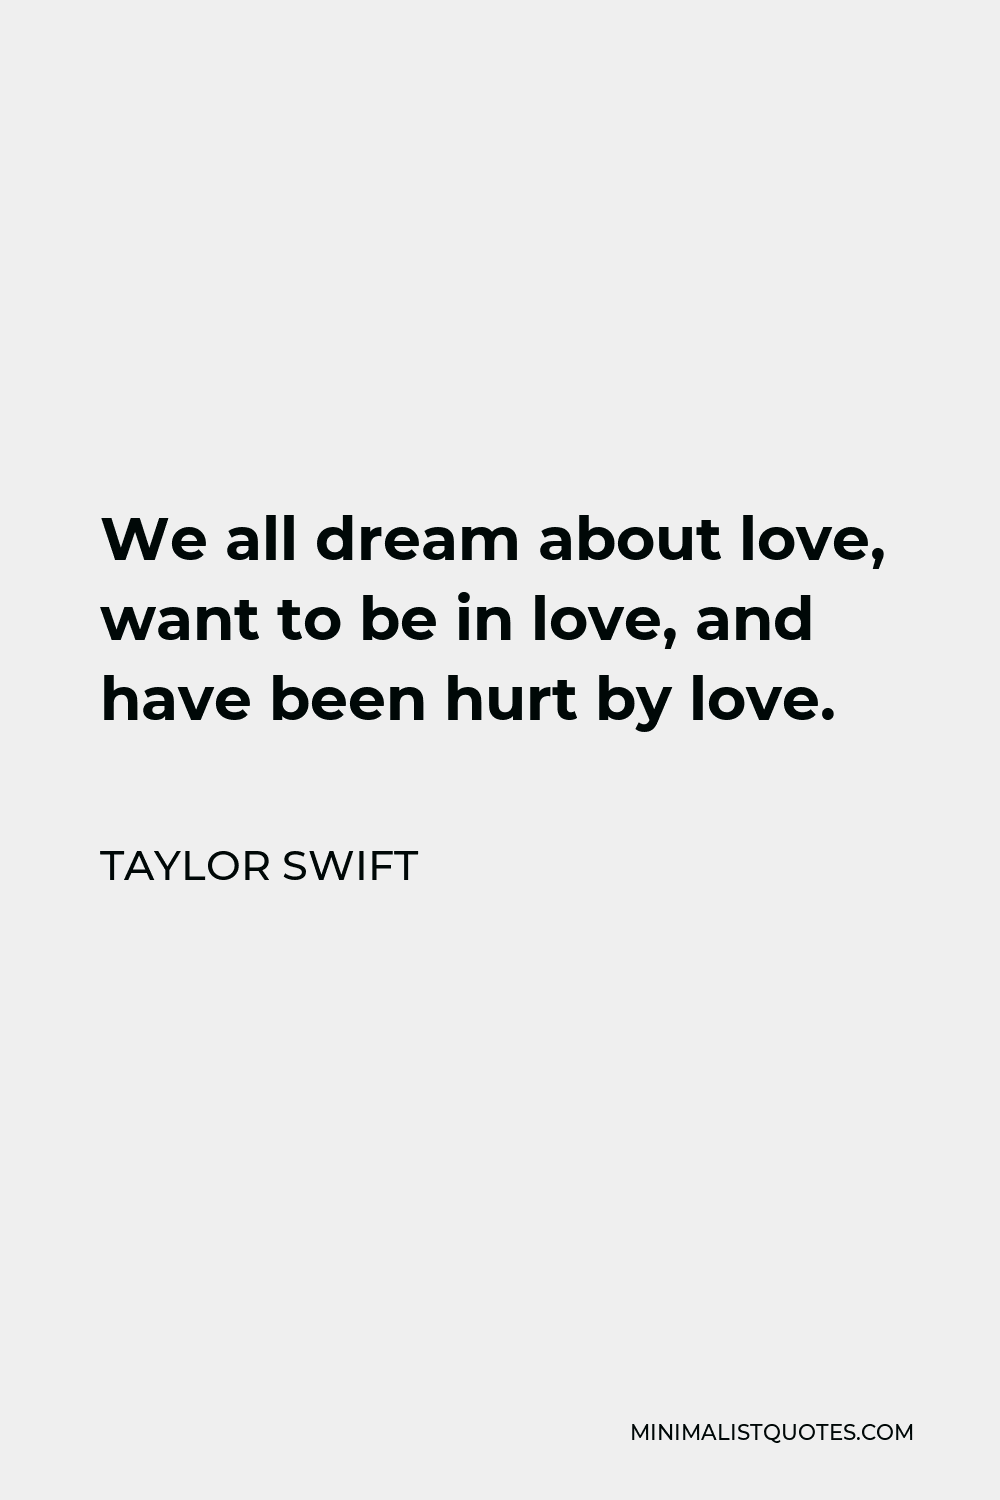 Taylor Swift Quote - We all dream about love, want to be in love, and have been hurt by love.